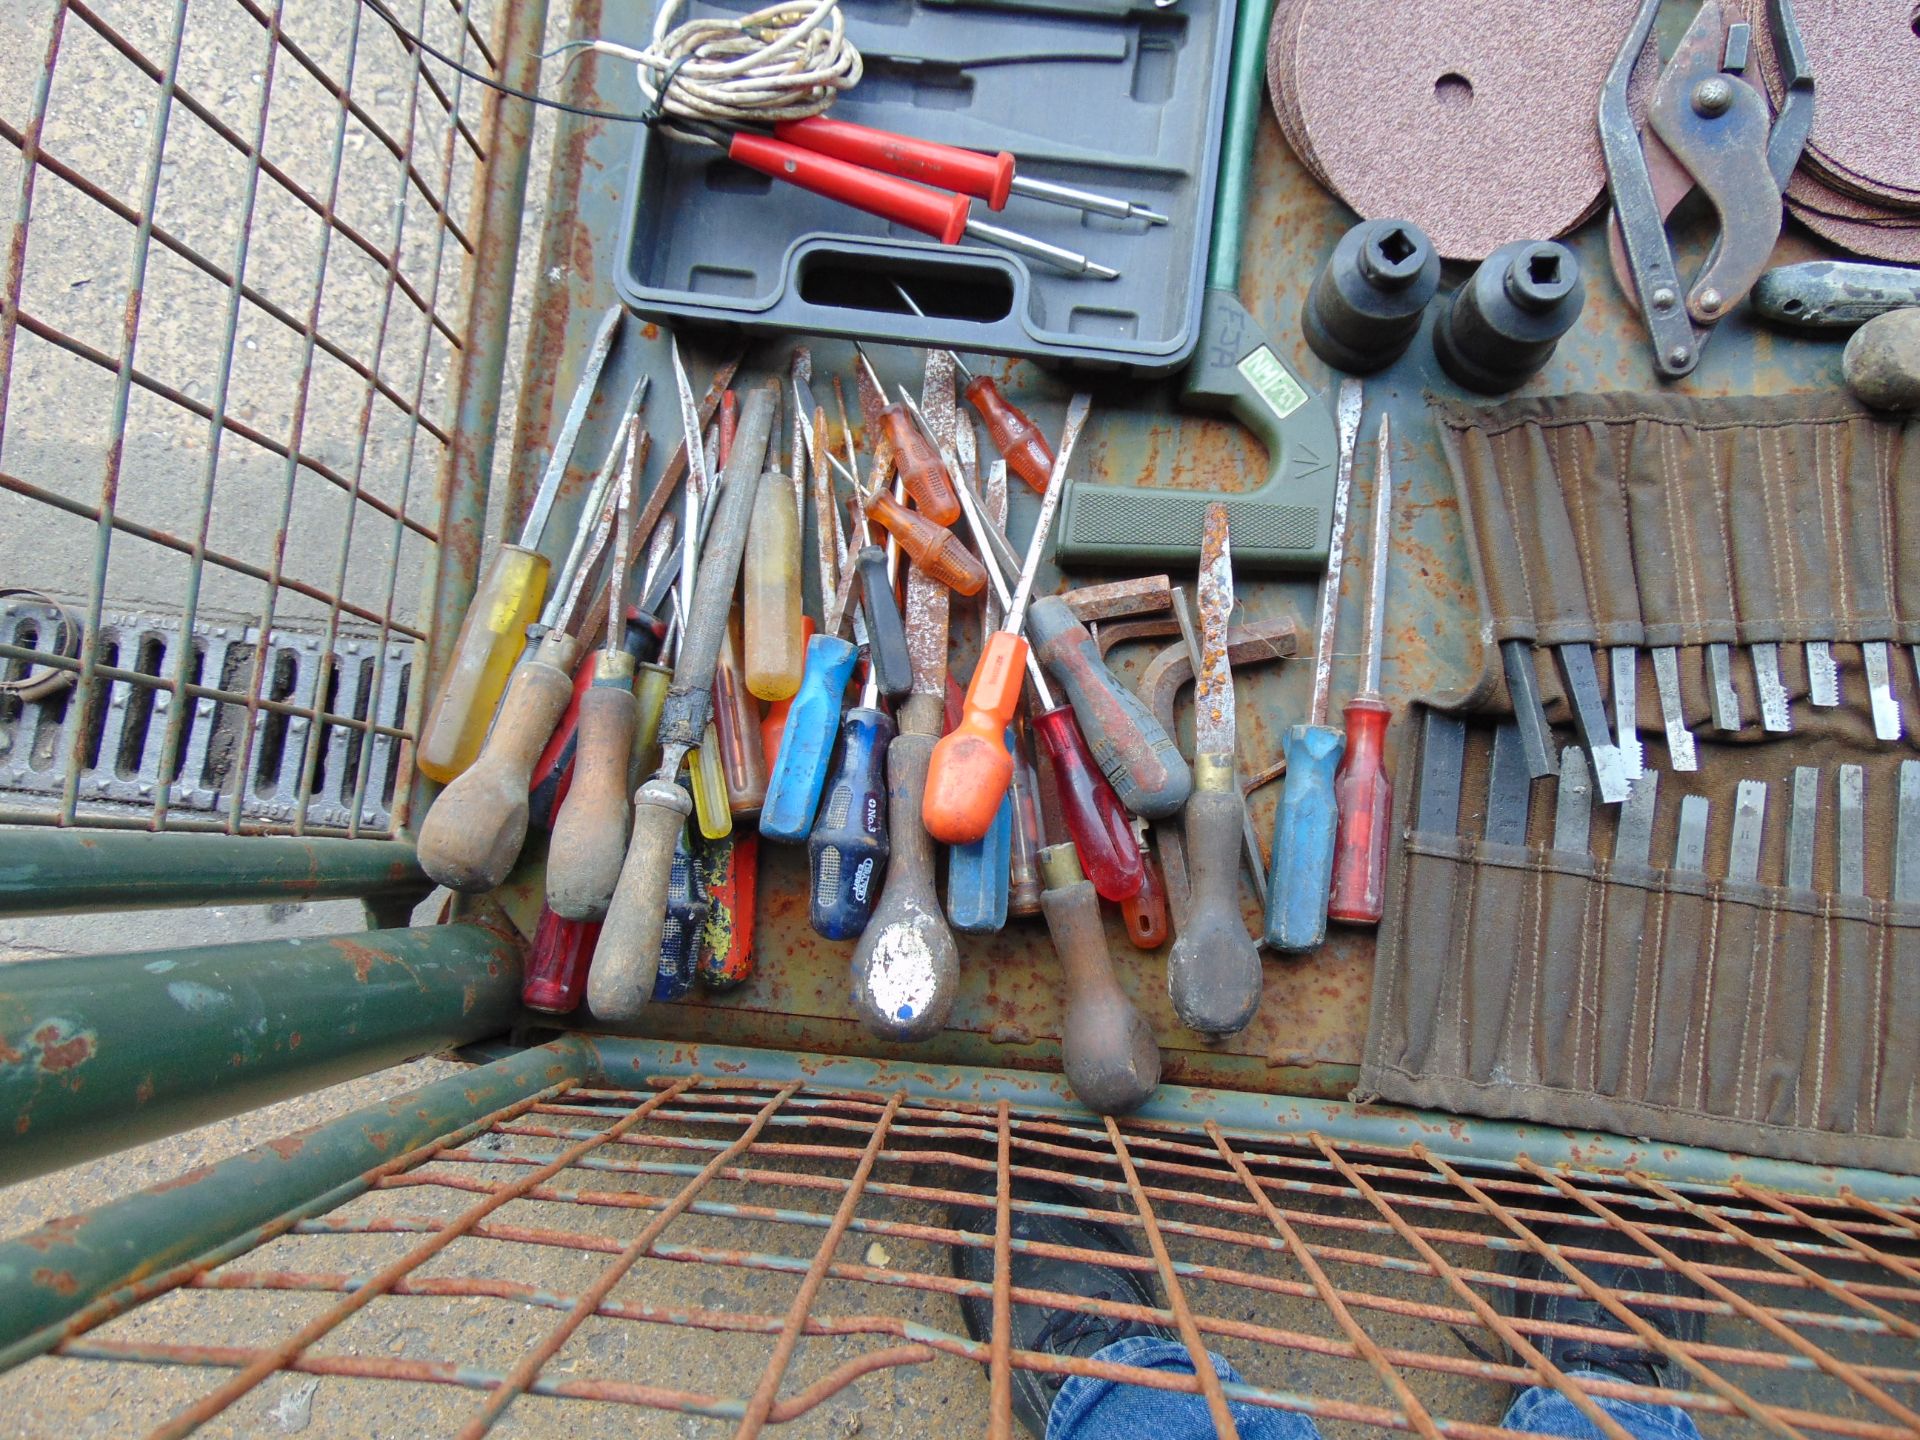 1 x Stillage of Workshop Tools, Spanners, Sockets, Lathe Tools, etc, Approx 120 Items - Image 4 of 9